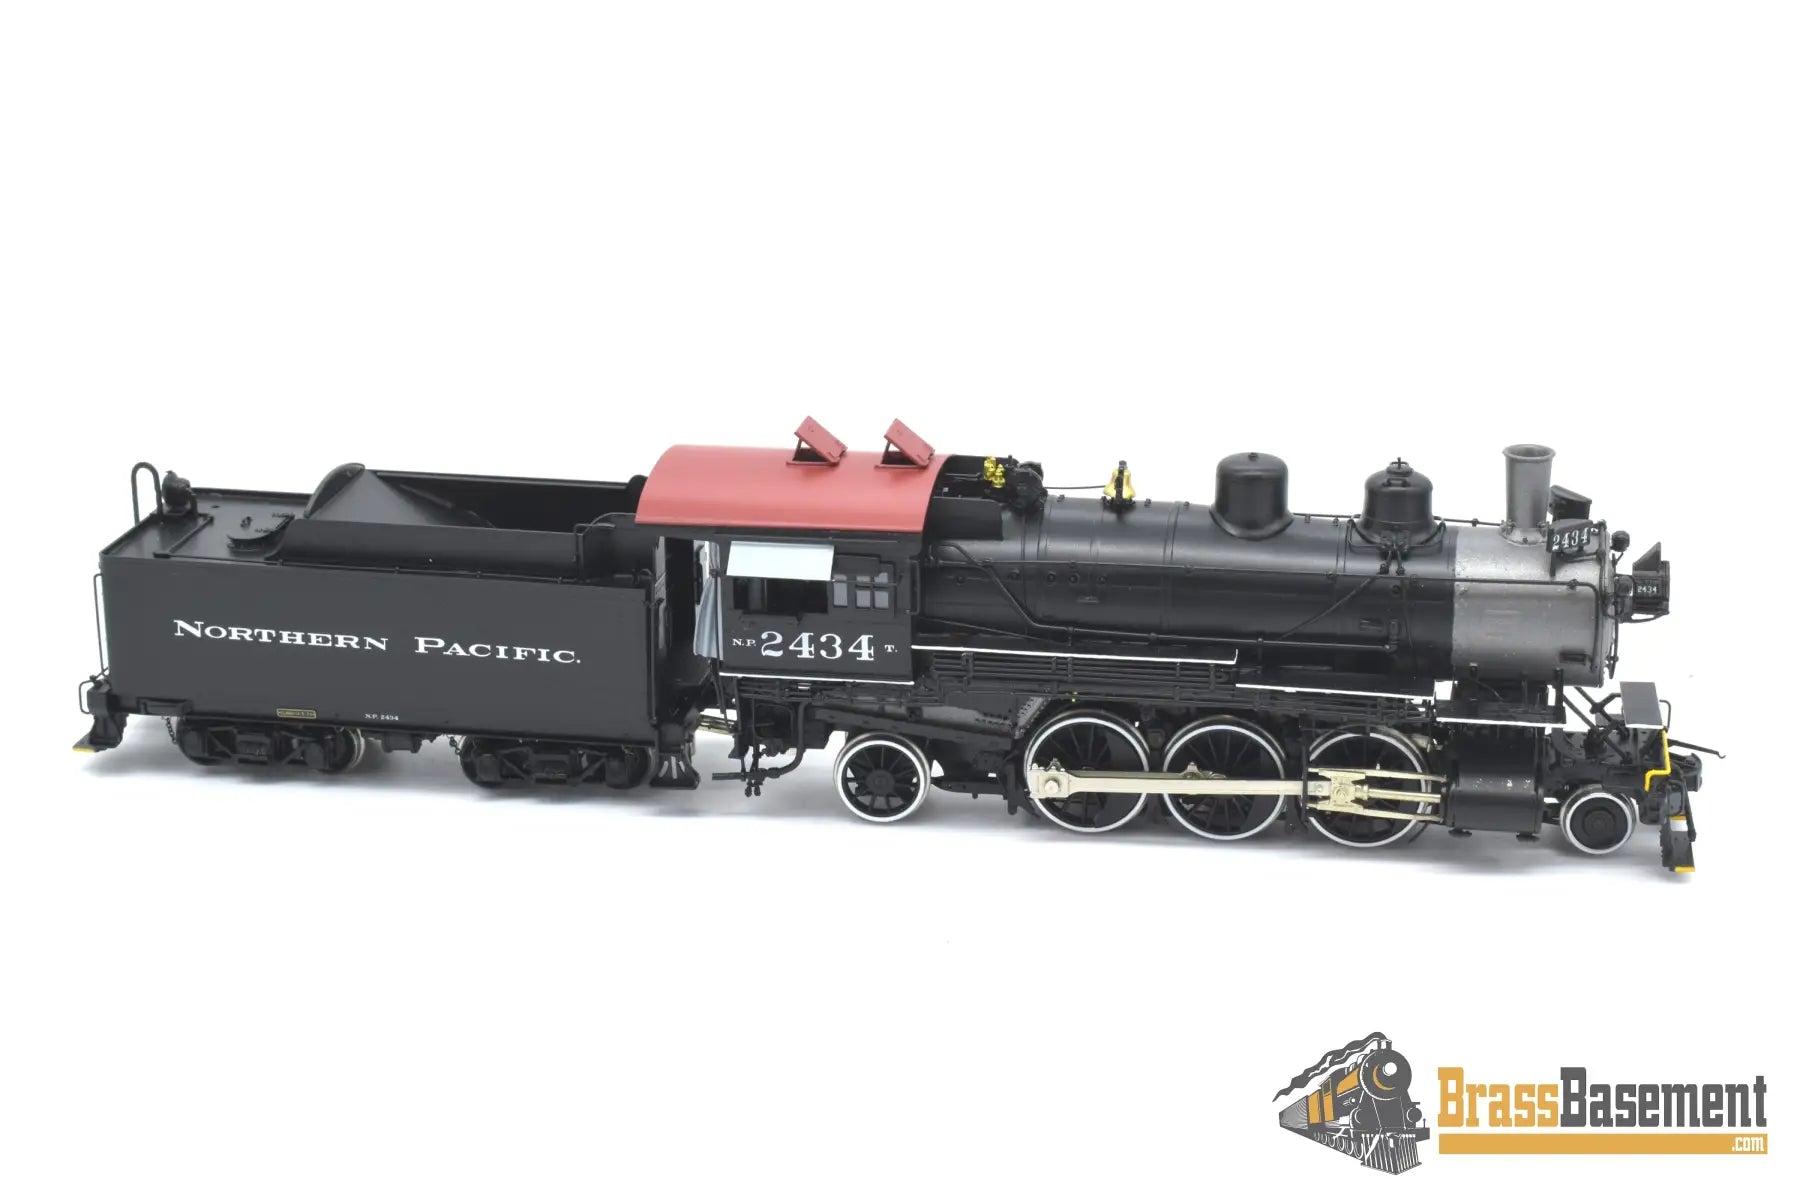 Ho Brass - W&R Northern Pacific Np T - 1 2 - 6 - 2 #2434 Version 4 W/ Nbr Brds Mint Condition Steam